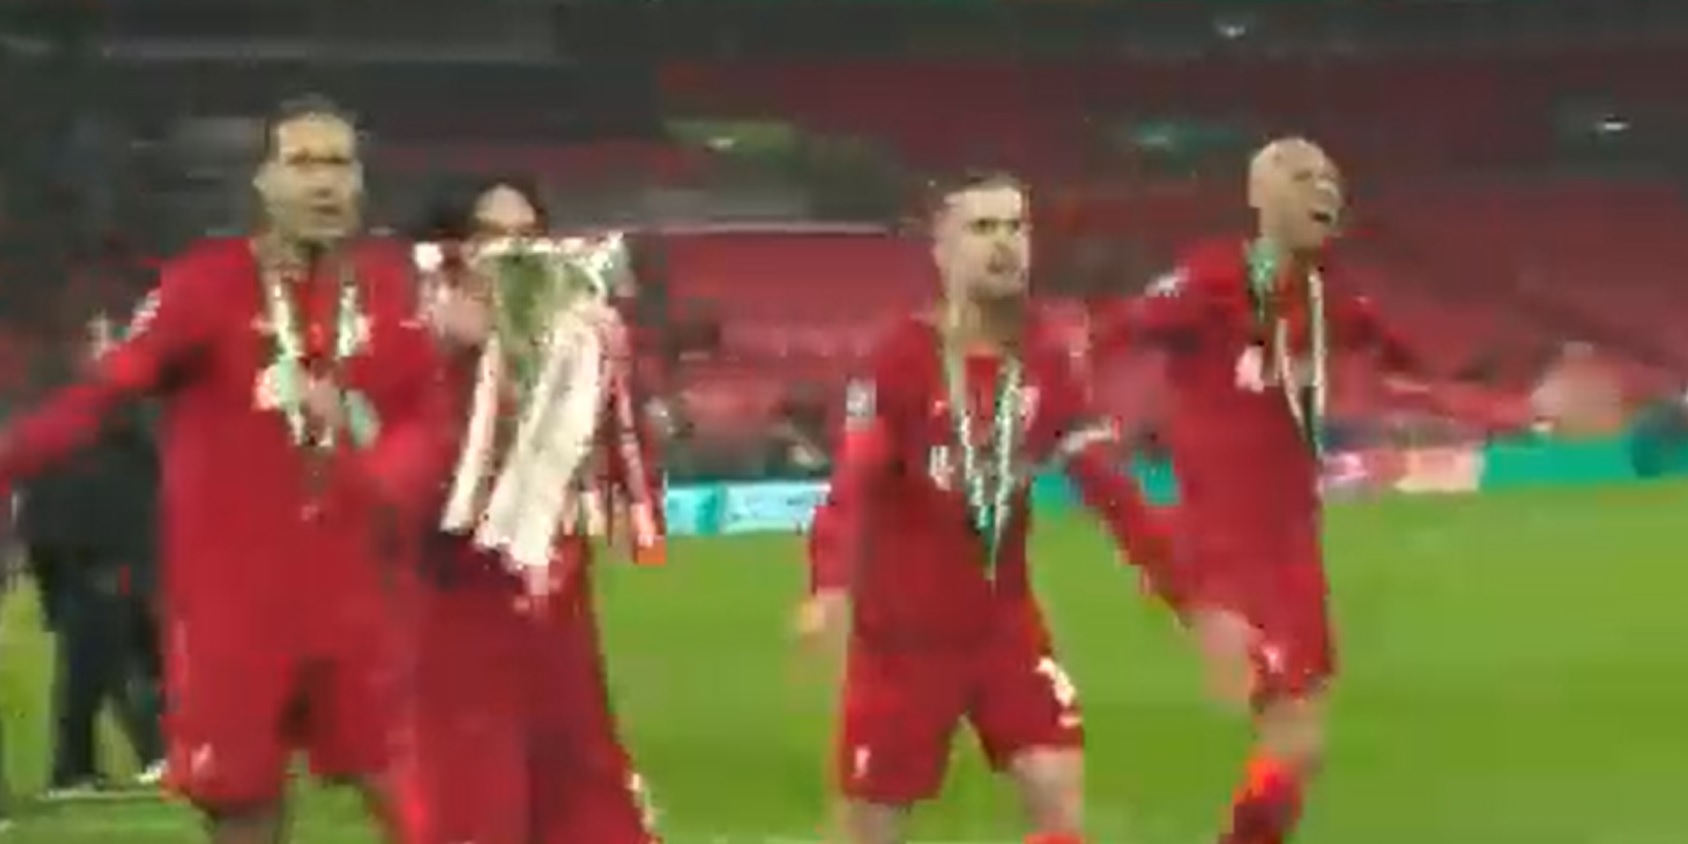 (Video) Heartwarming moment Hendo and Co. hand Minamino the trophy and encourage fans to make noise